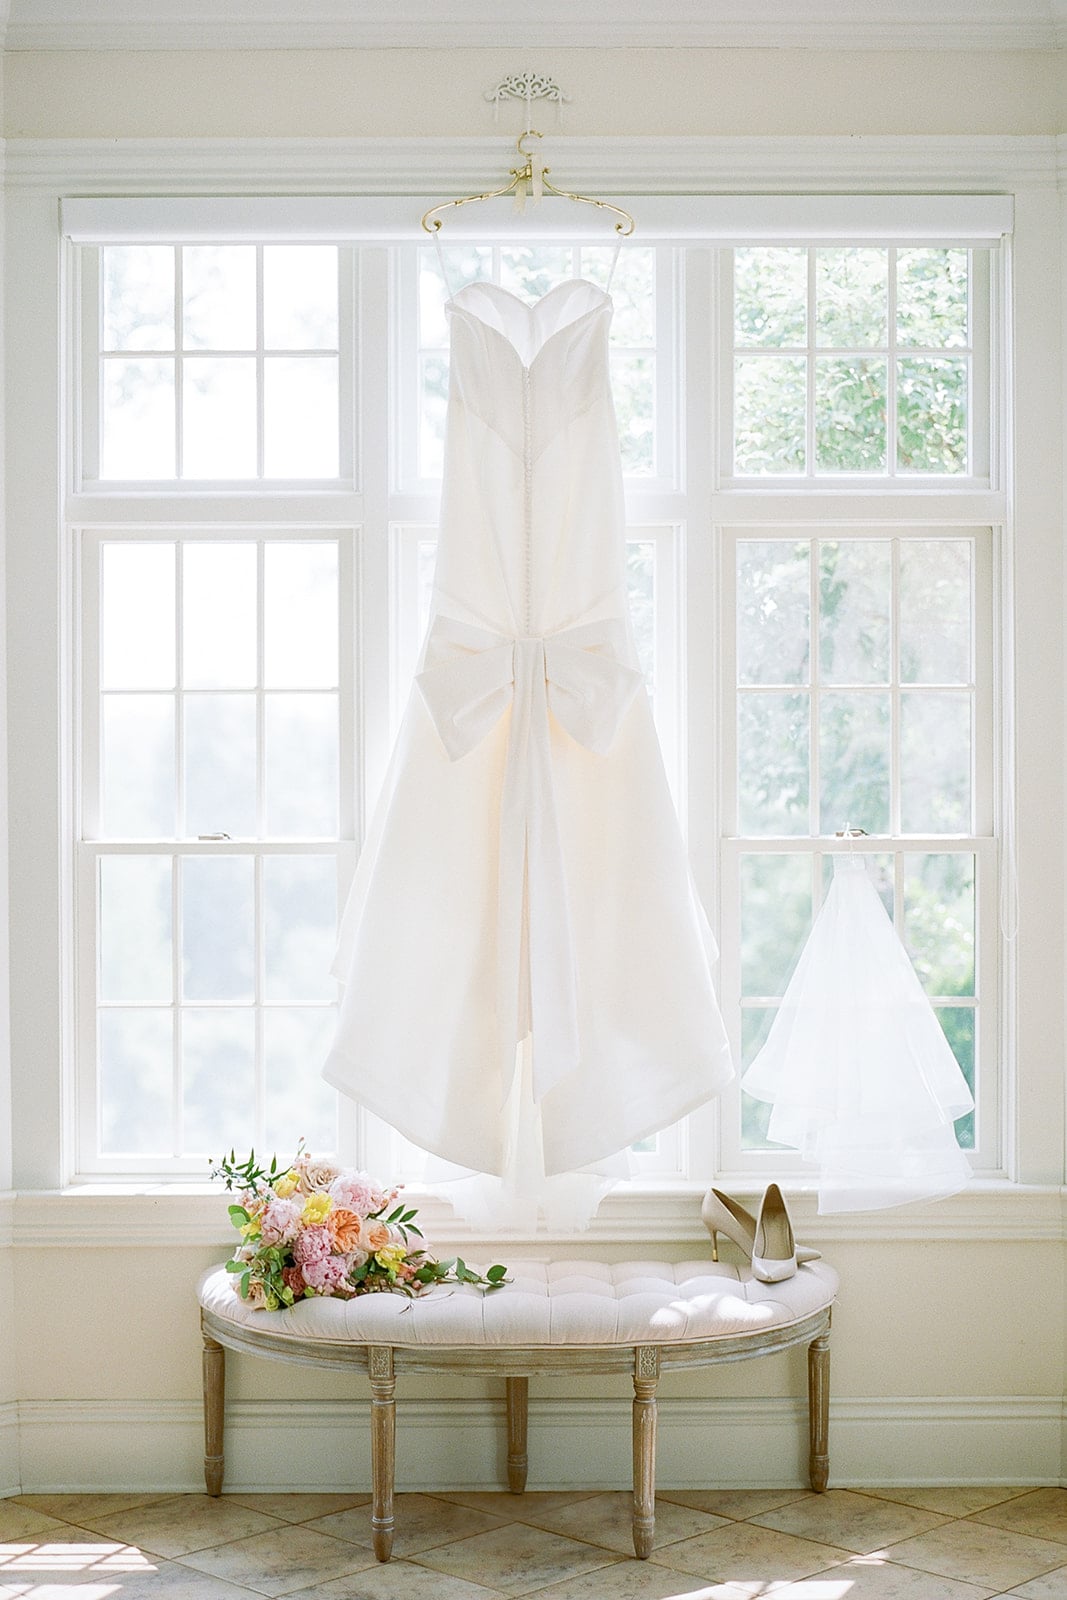 Wedding dress portrait: How much should you invest in a wedding photographer by Lauren Renee